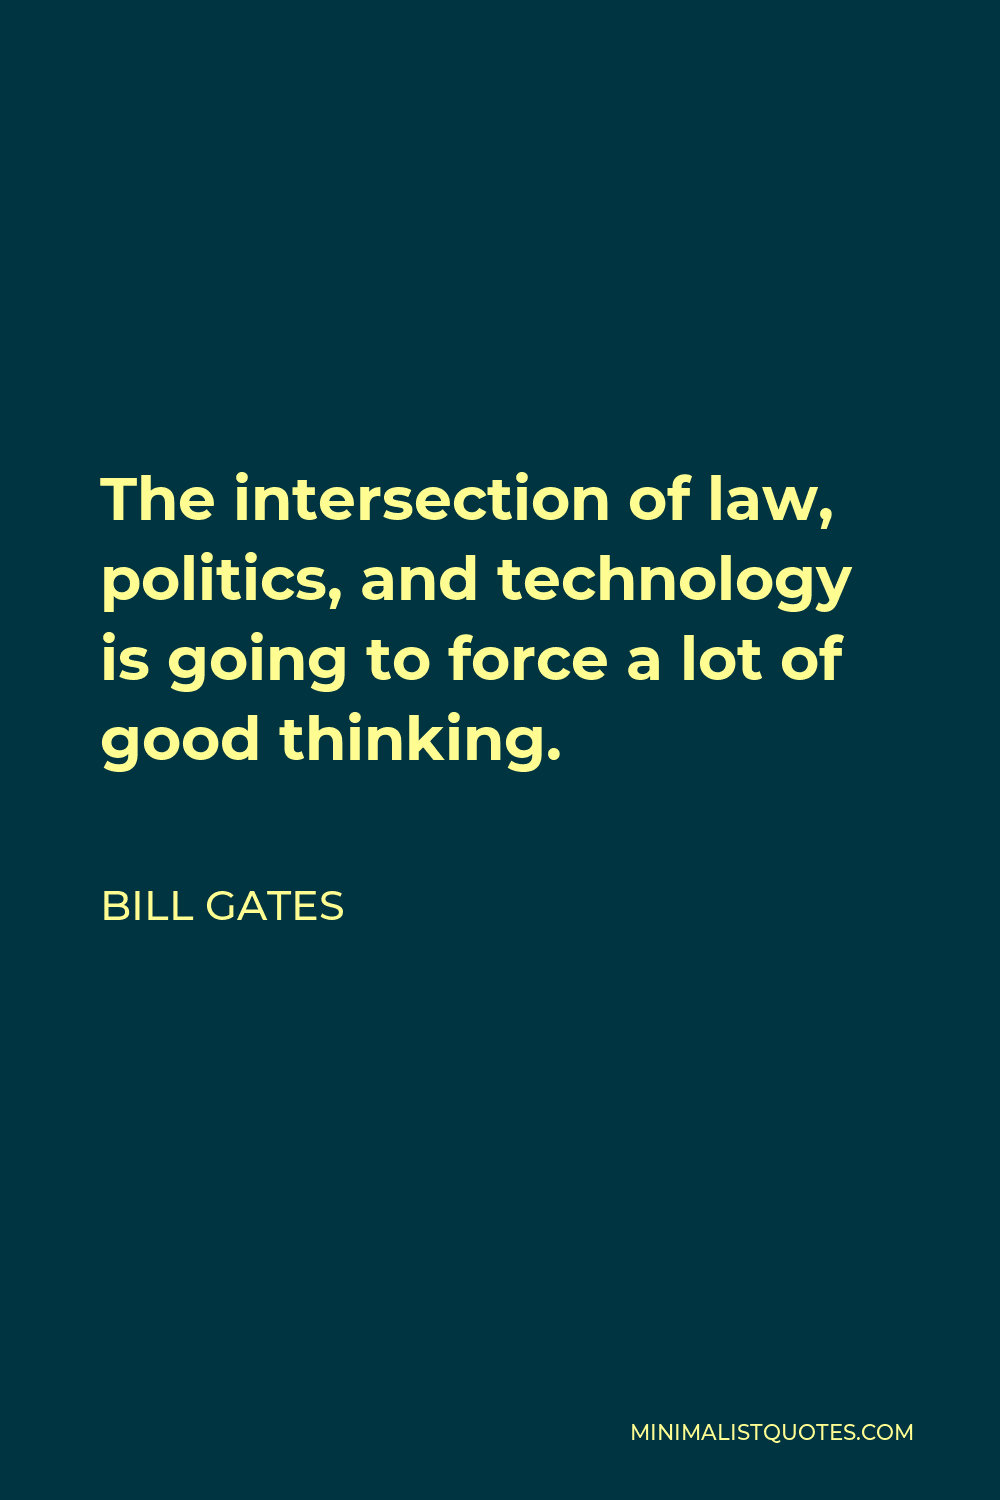 Bill Gates Quote - The intersection of law, politics, and technology is going to force a lot of good thinking.